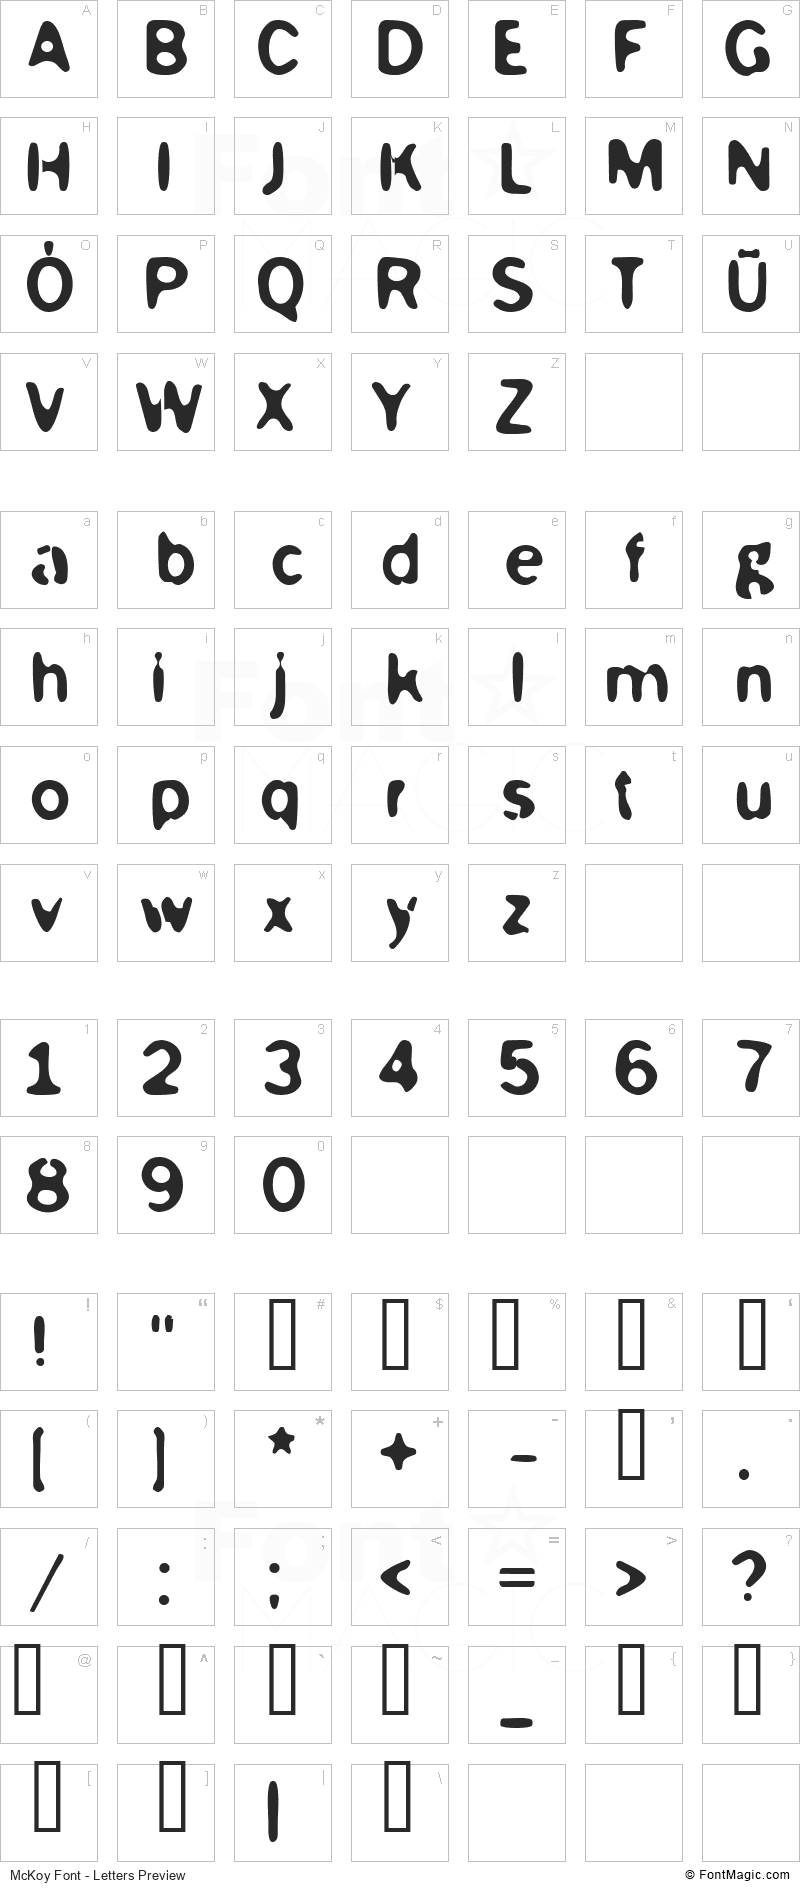 McKoy Font - All Latters Preview Chart